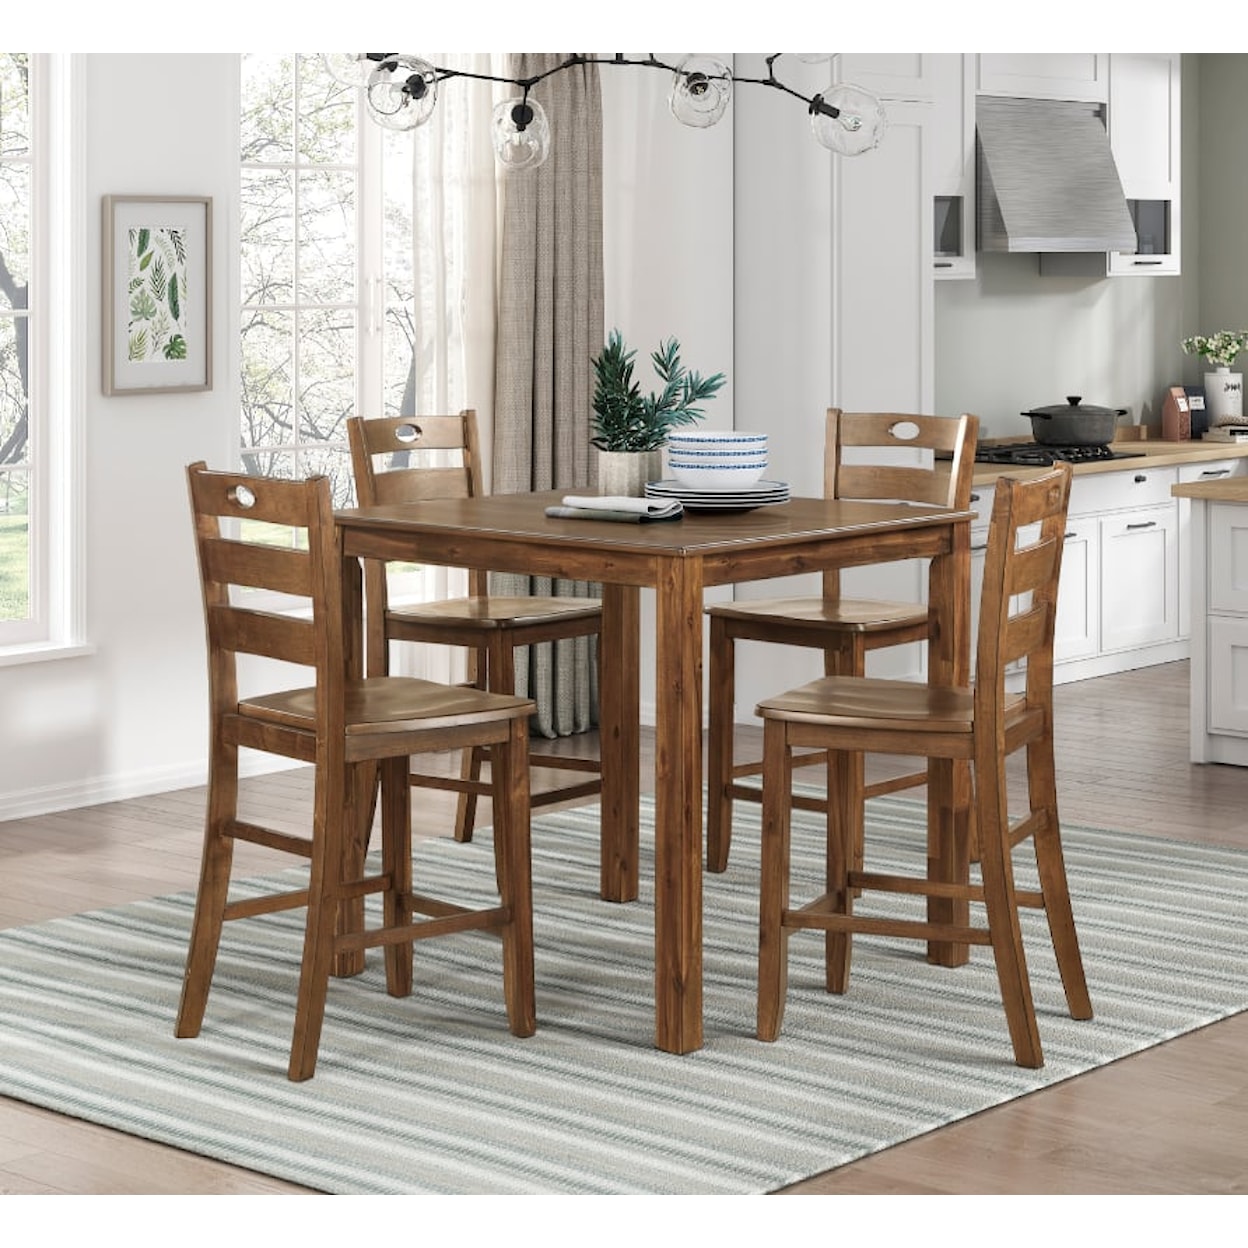 Homelegance Stowe 5-Piece Counter Height Dining Set